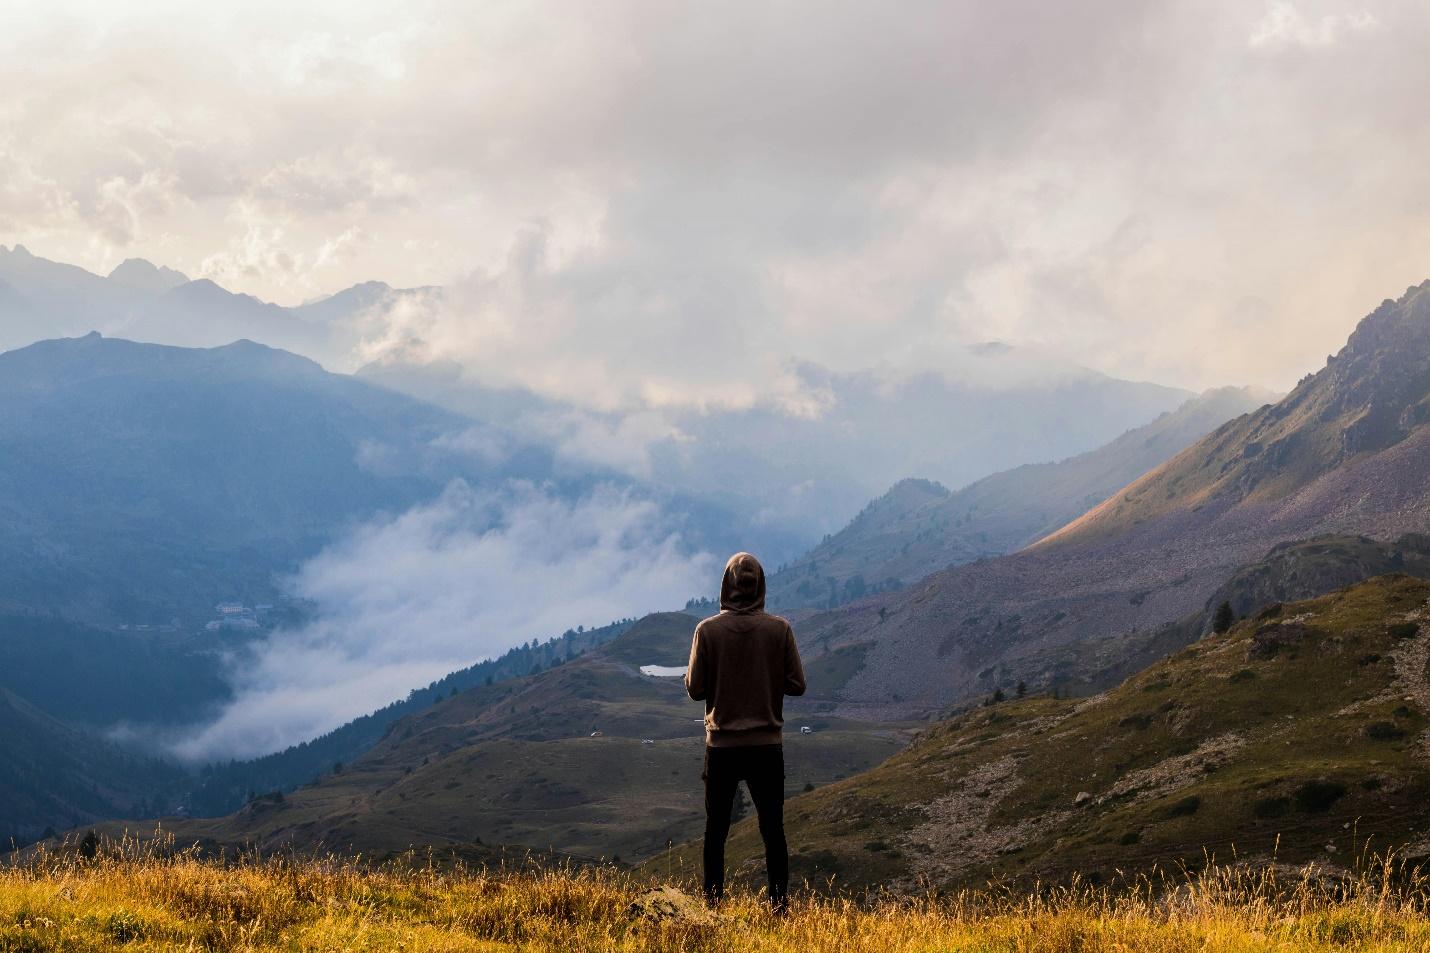 IMAGE SOURCE: https://www.pexels.com/photo/person-wearing-brown-pullover-and-black-jeans-standing-on-mountain-top-with-the-scenic-view-3163927/